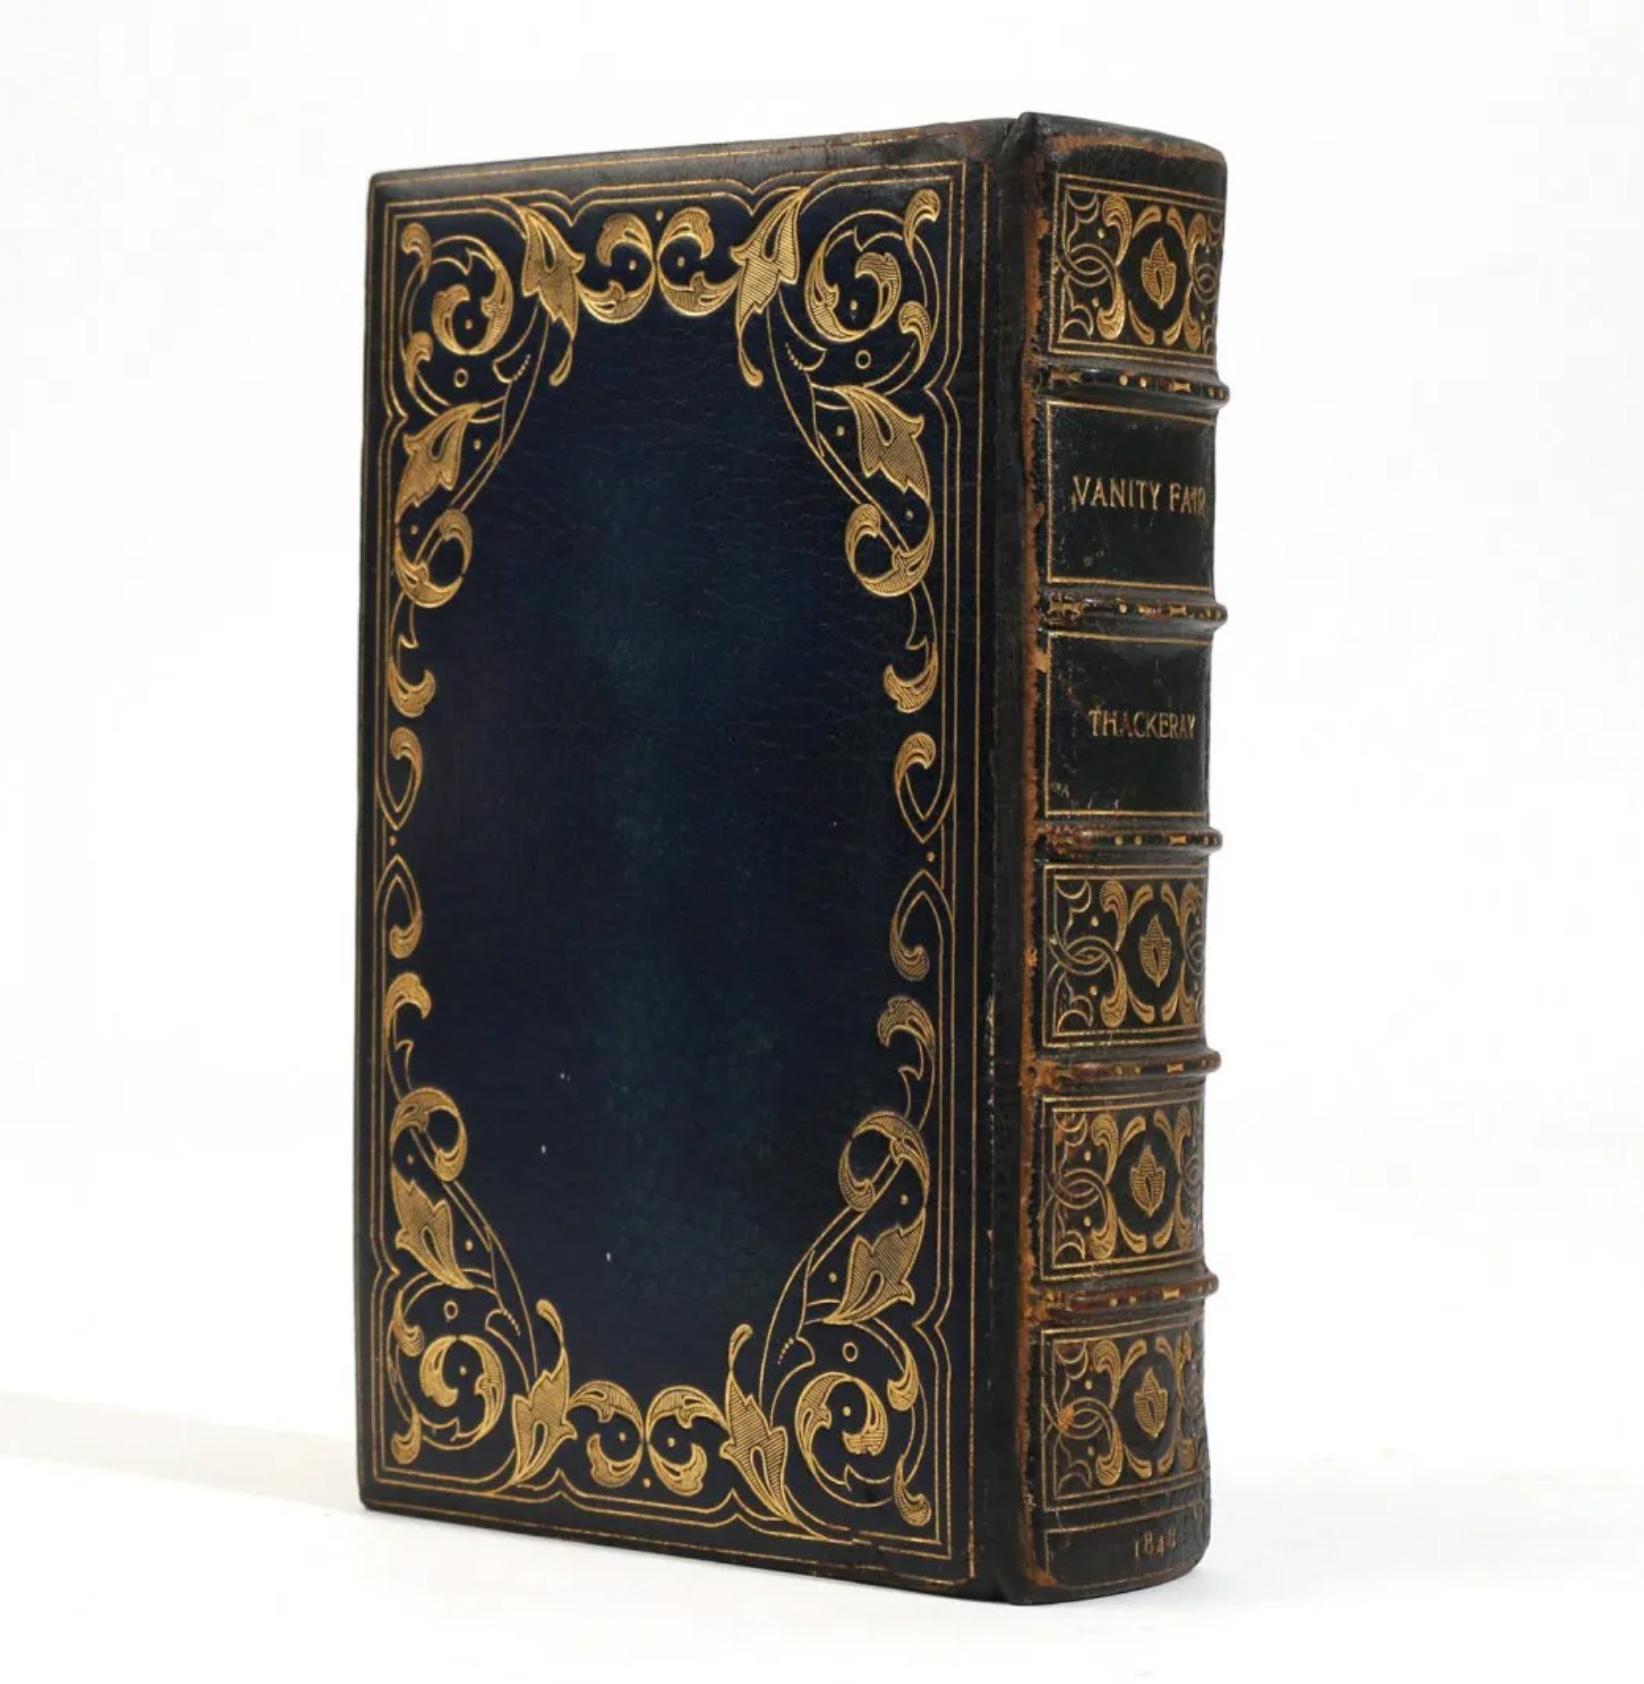 Vanity Fair; A Novel Without a Hero. With Illustrations On Steel and Wood By the Author.
London: Bradbury & Evans, 1848 / Vanity Fair; A Novel Without a Hero. With Illustrations On Steel and Wood By the Author.

London: Bradbury & Evans, 1848.